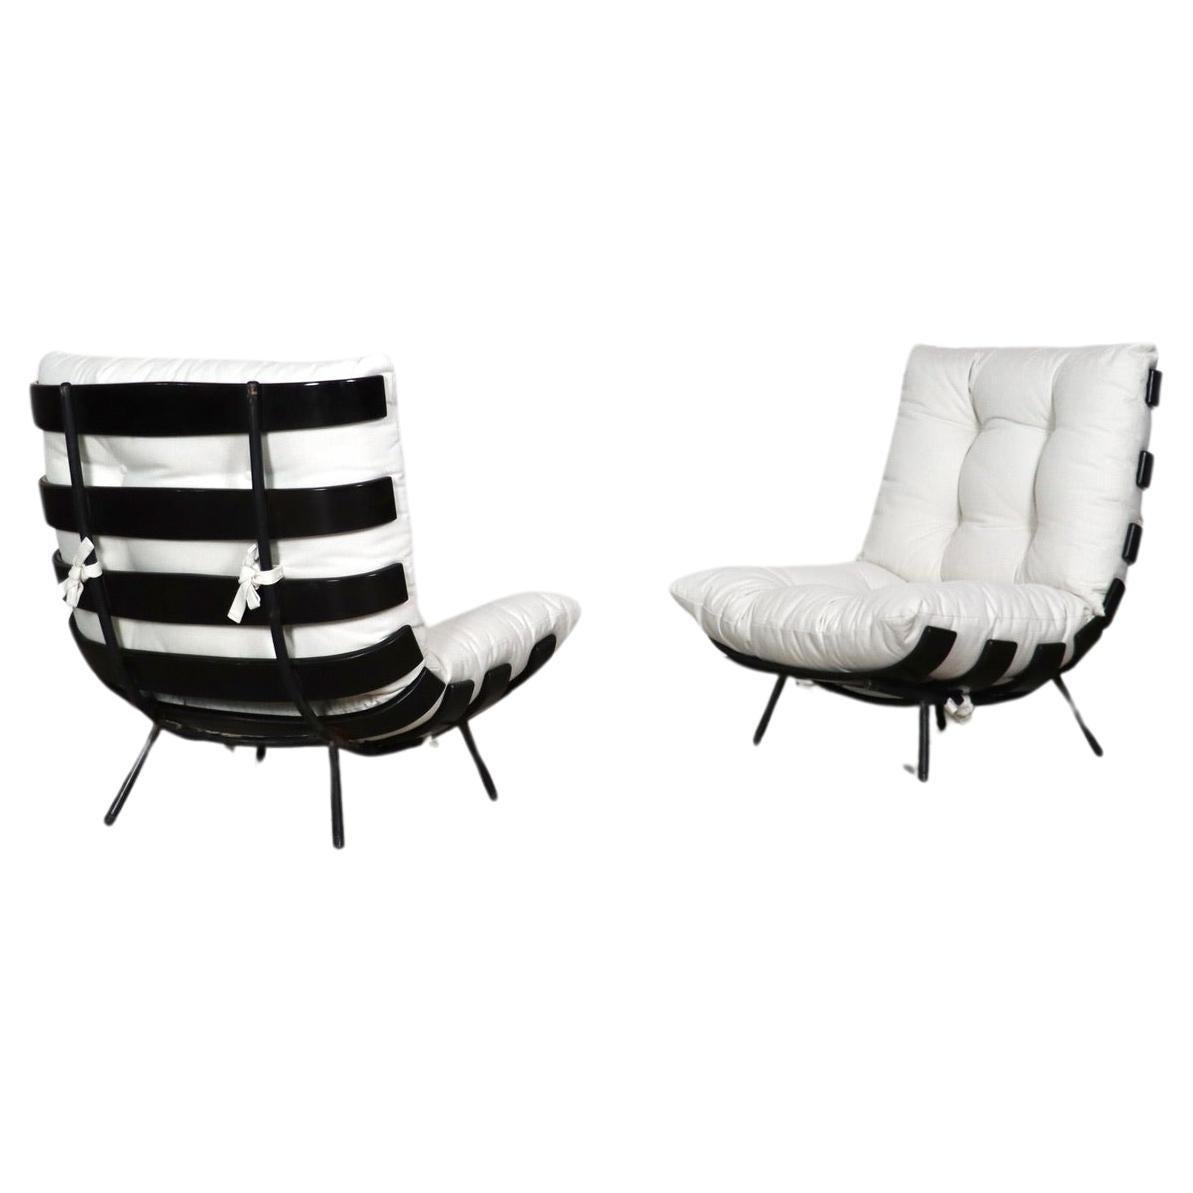 Pair Of Costela Lounge Chairs By Carlo Hauner And Martin Eisler, 1950s For Sale